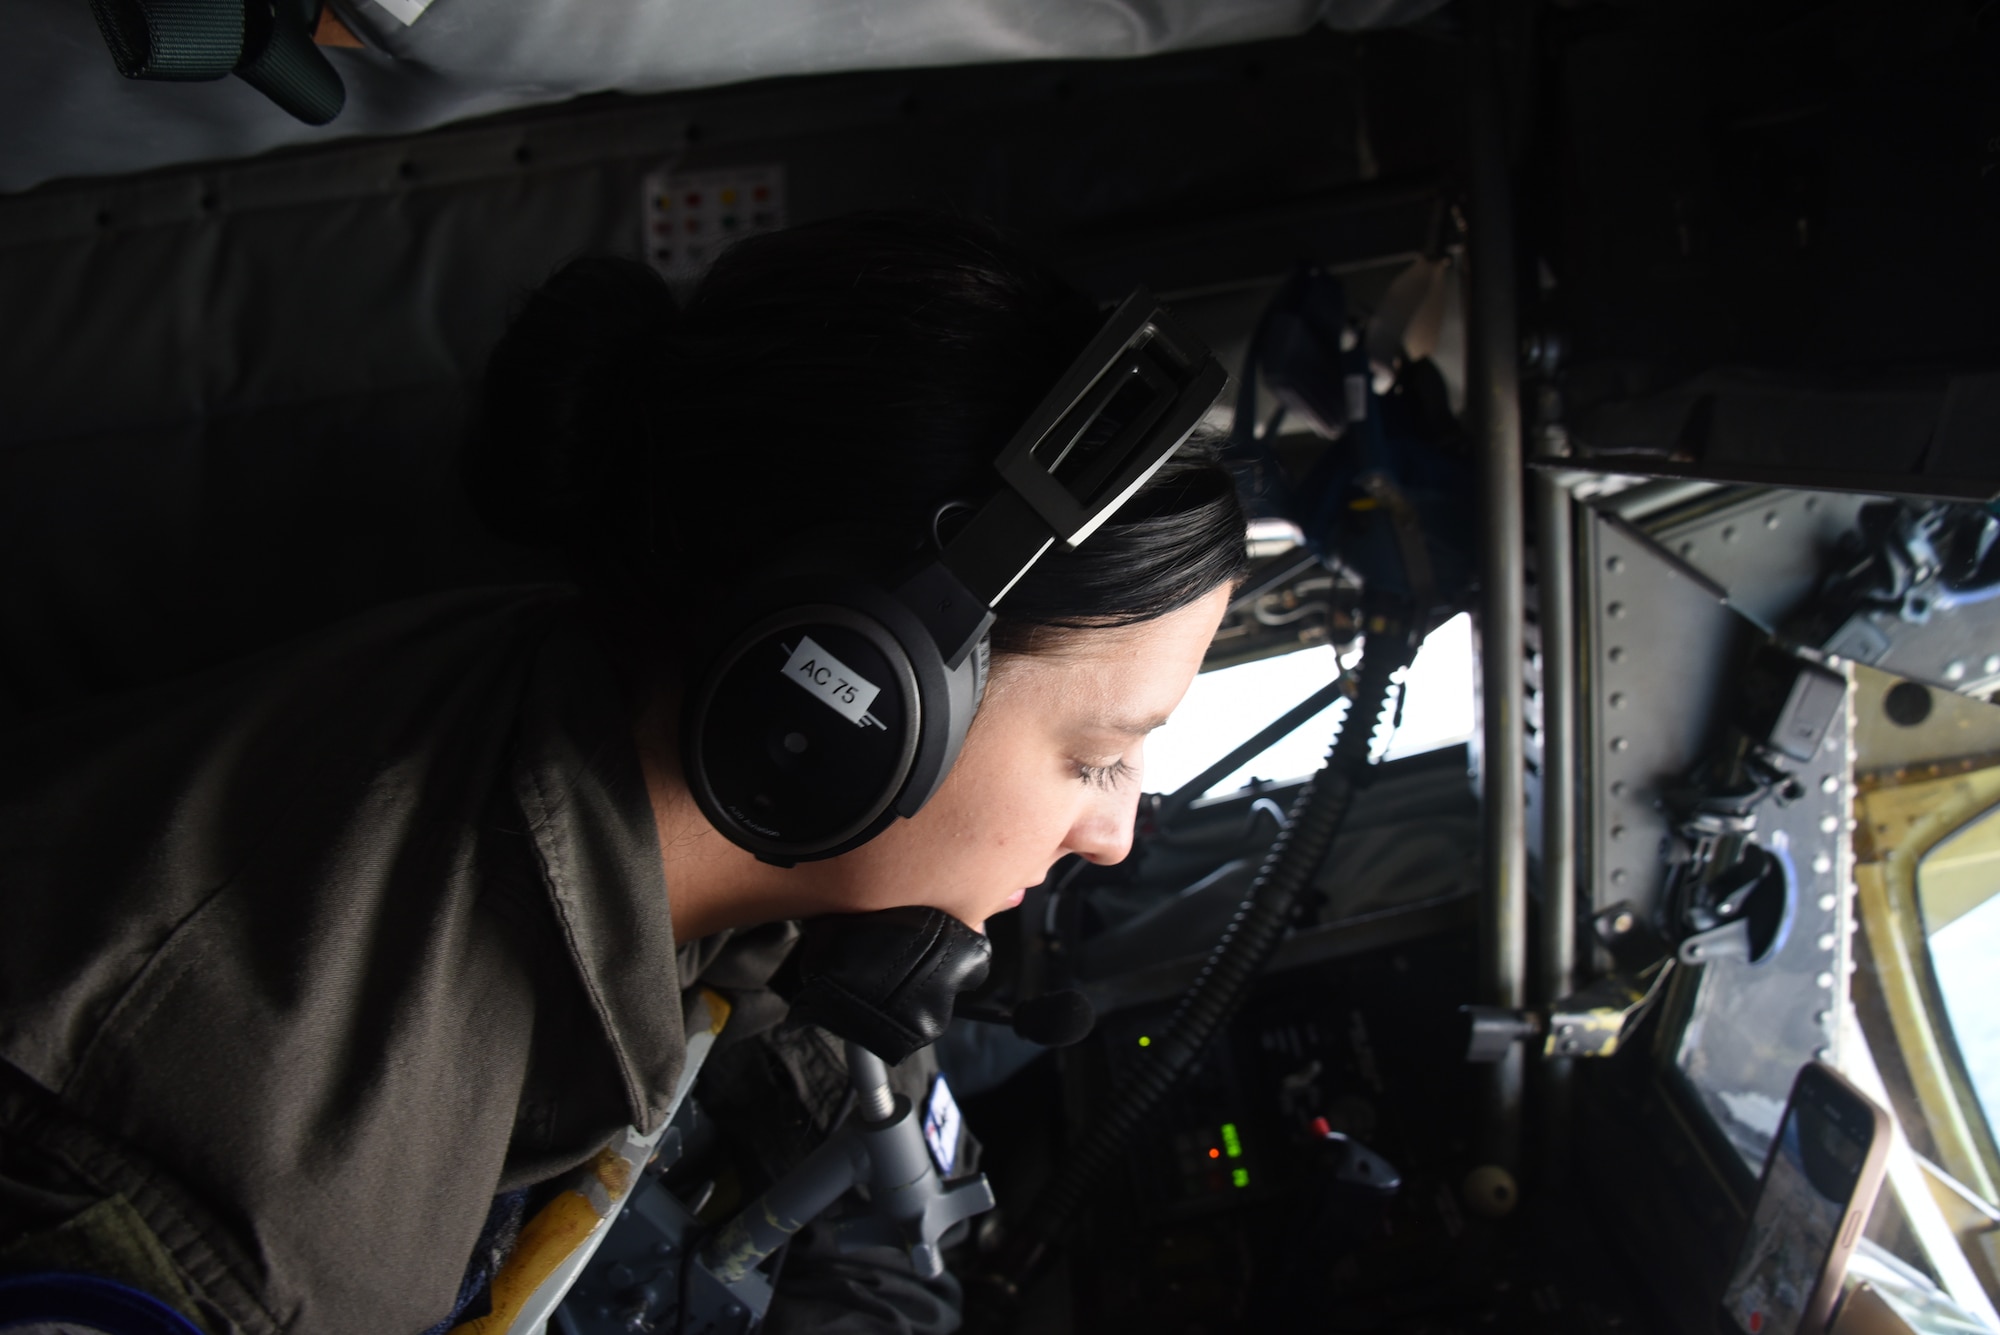 185th ARW Staff Sgt. Meleah Johnson lowers the boom of a KC-135 Stratotanker